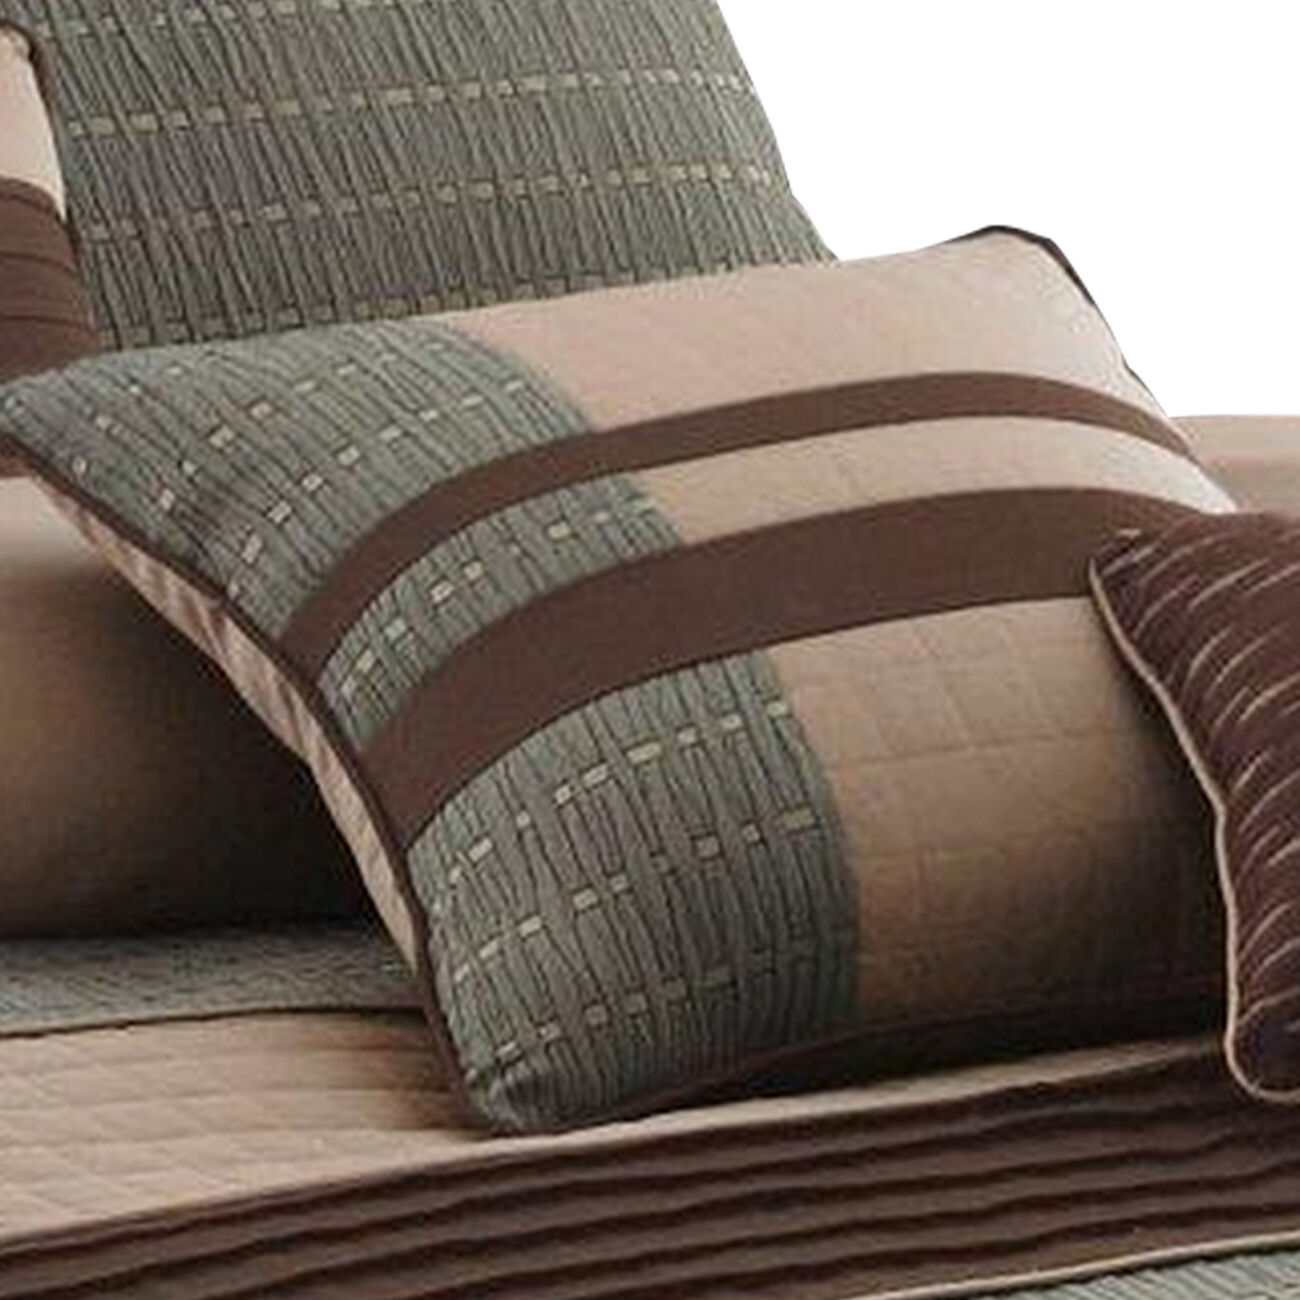 7 Piece Queen Comforter Set with Pleats and Texture, Gray and Brown